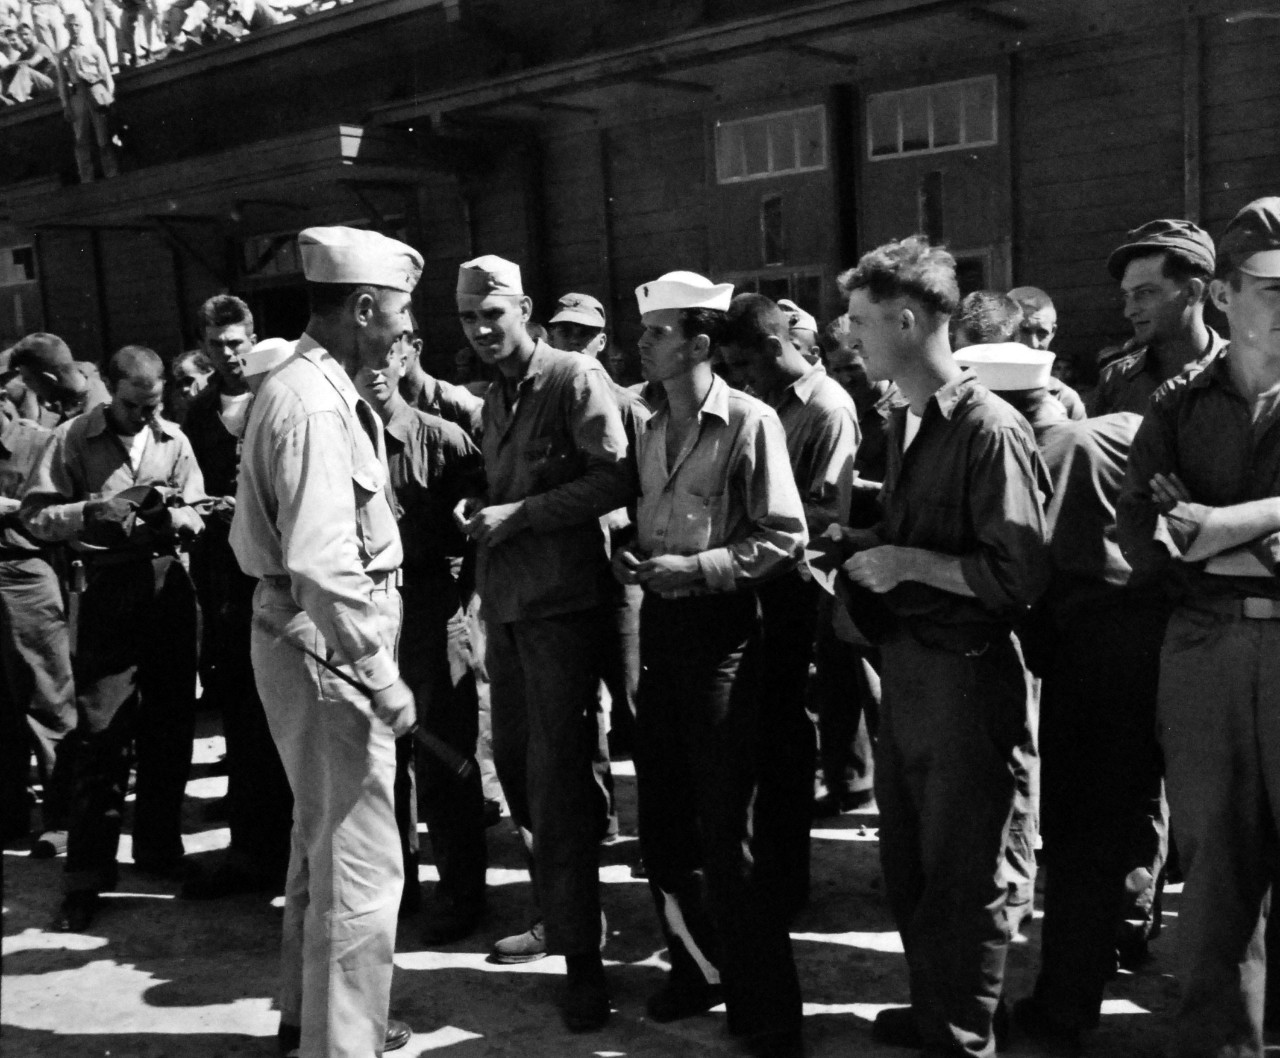 127-GW-1503-134170:  Prisoner of War Camp, Yokosuka, Japan, 1945.    General William T. Clement, USMC, and Prisoners of War, Yokosuka, Japan, September 1945.   Official U.S. Marine Corps photograph, now in the collection of the National Archives.  (2014/6/5).  